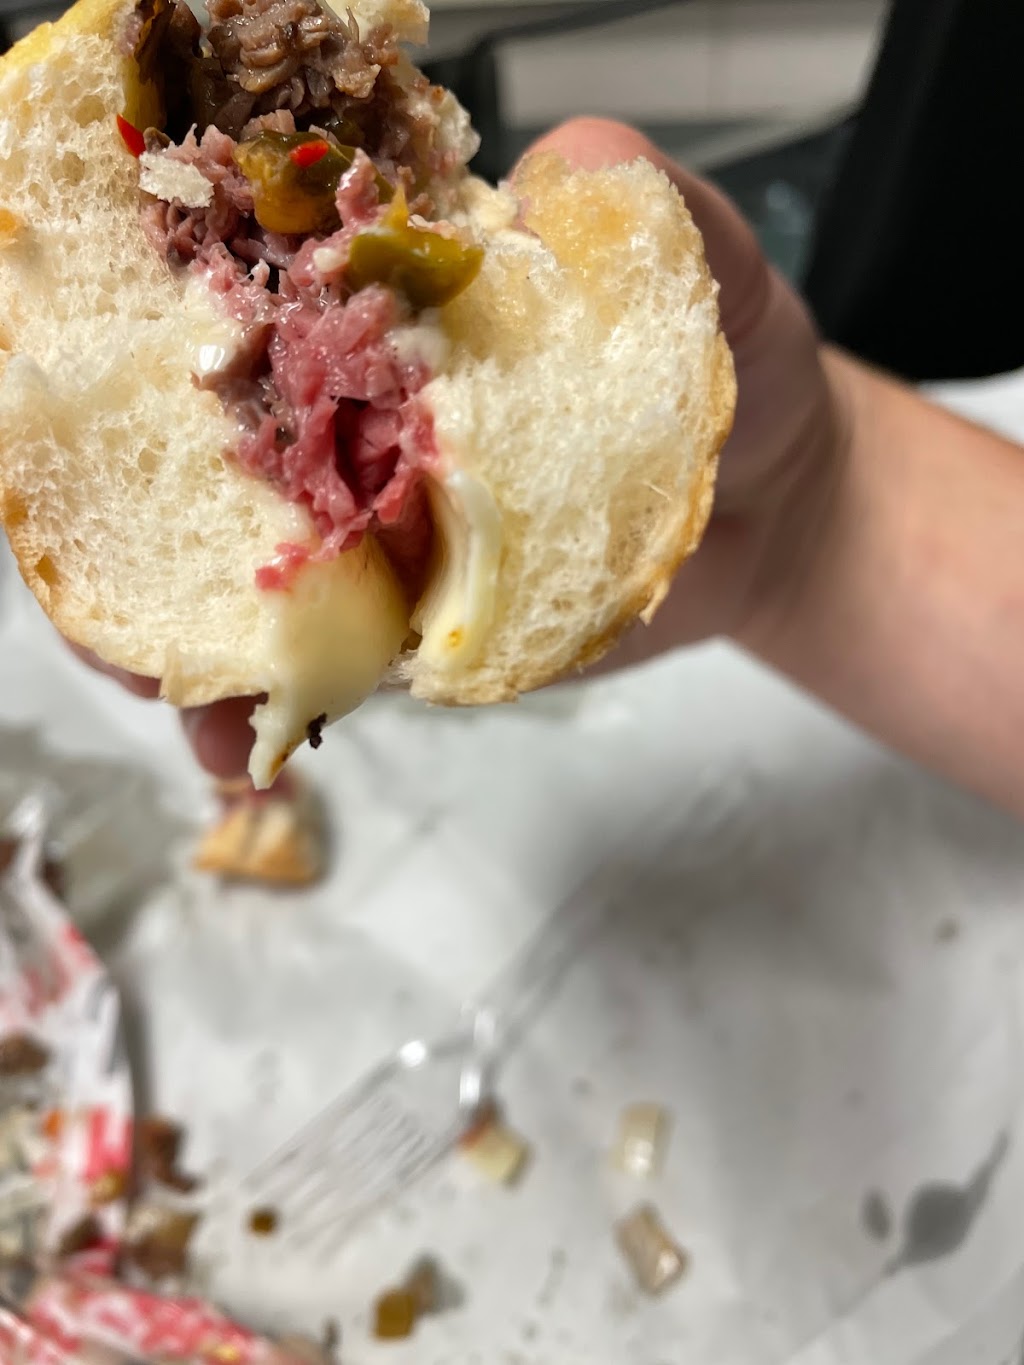 Capriottis Sandwich Shop | 902 Roby Dr, Hammond, IN 46320, USA | Phone: (219) 370-0222